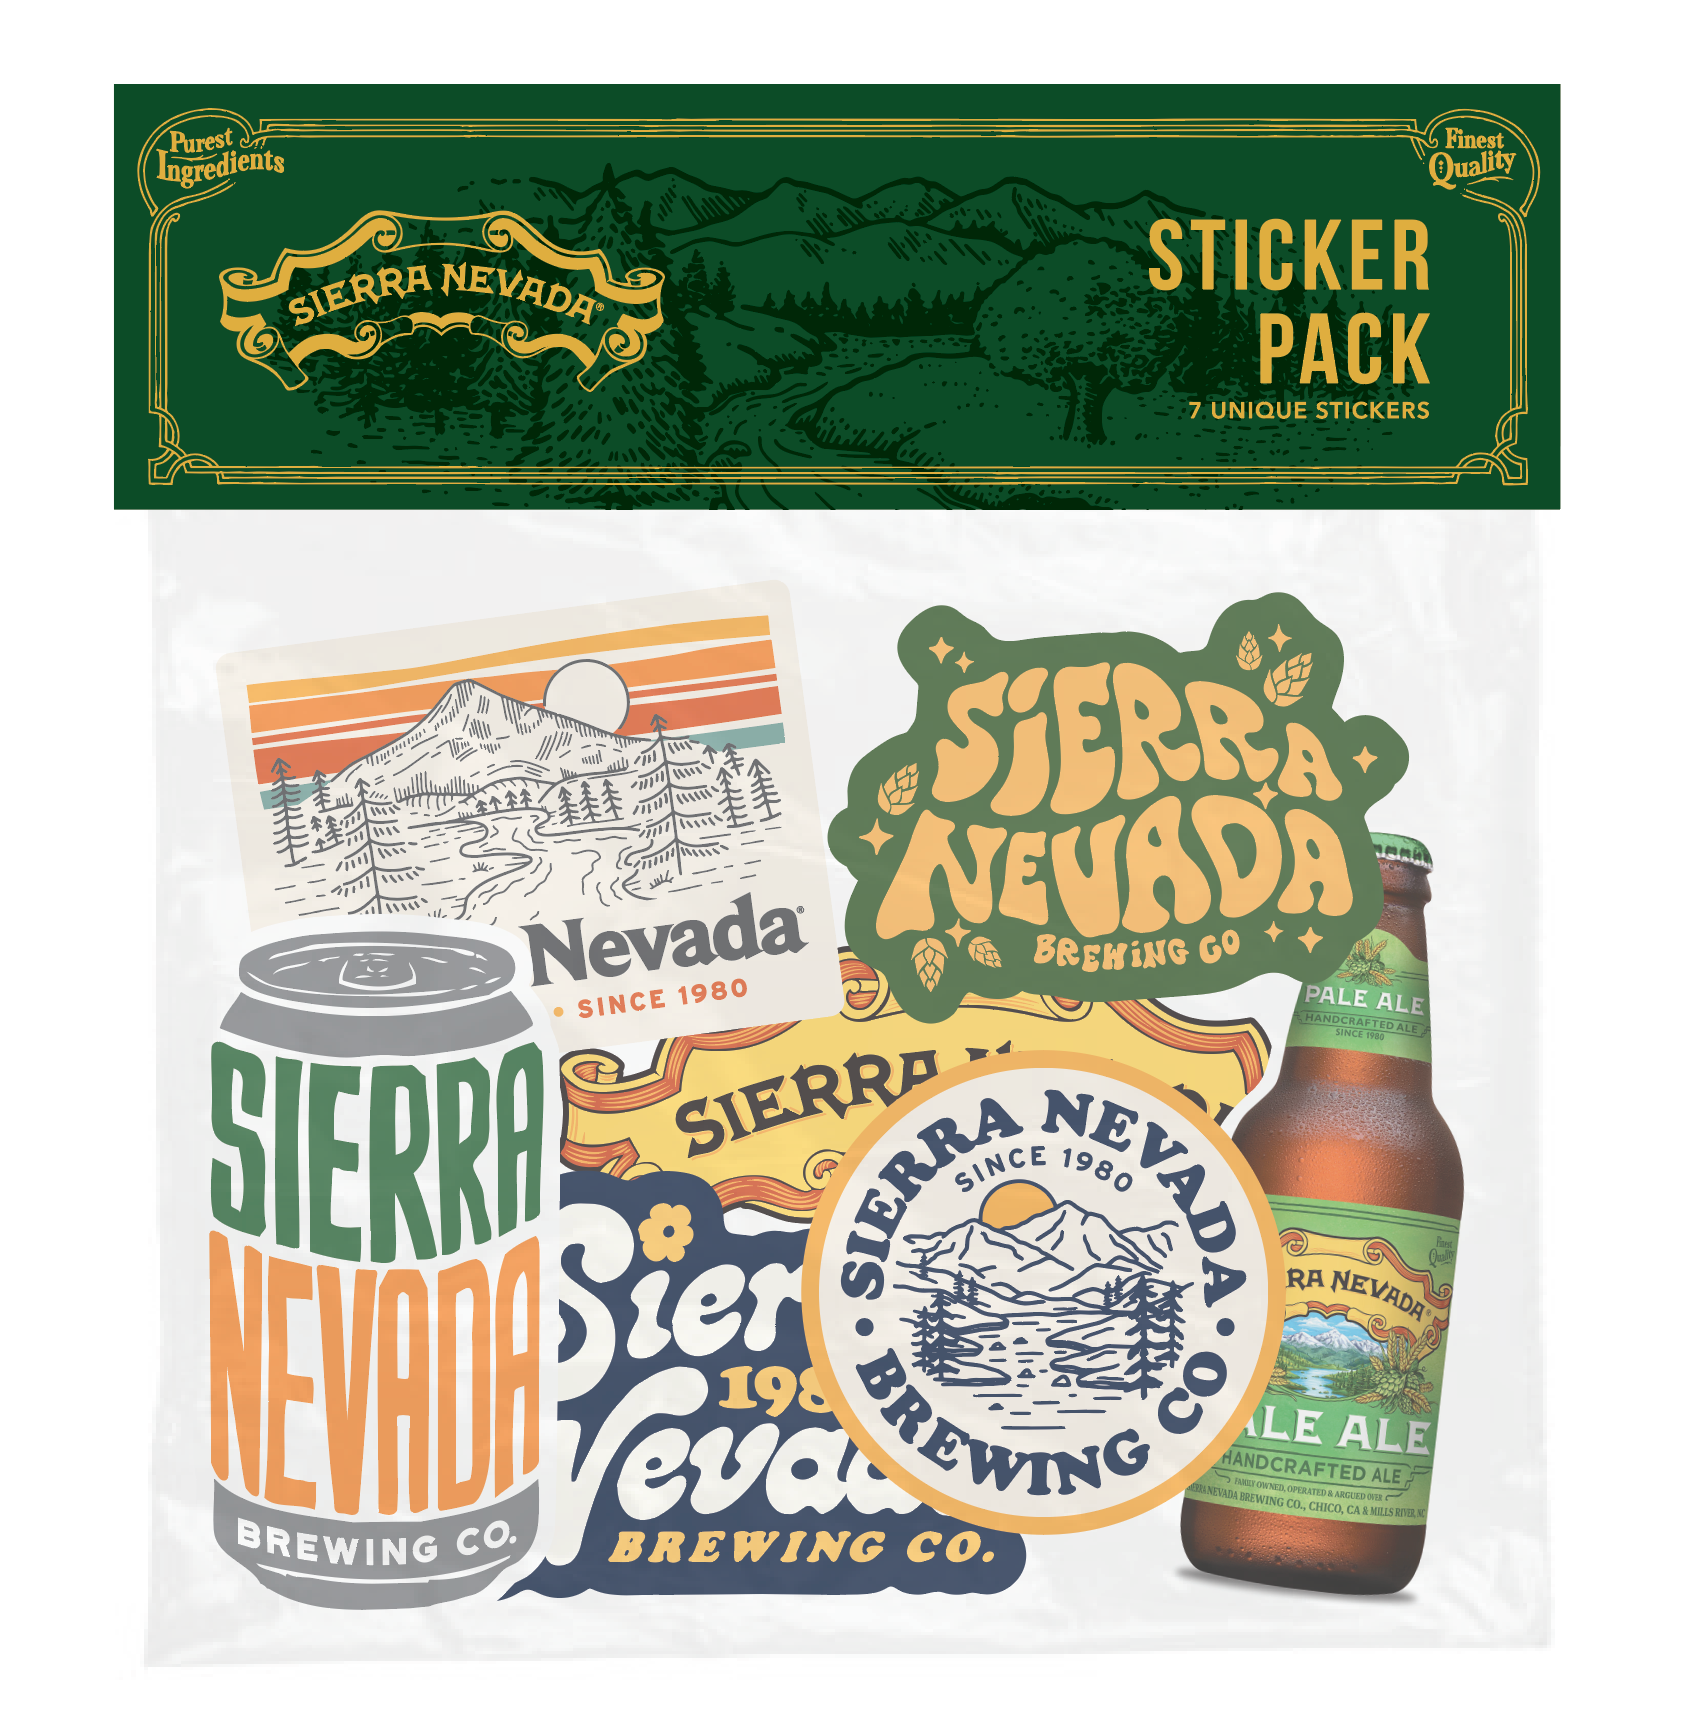 Sierra Nevada Brewing Co. assorted sticker pack, featuring a variety of logo stickers and beer can and beer bottle branded stickers